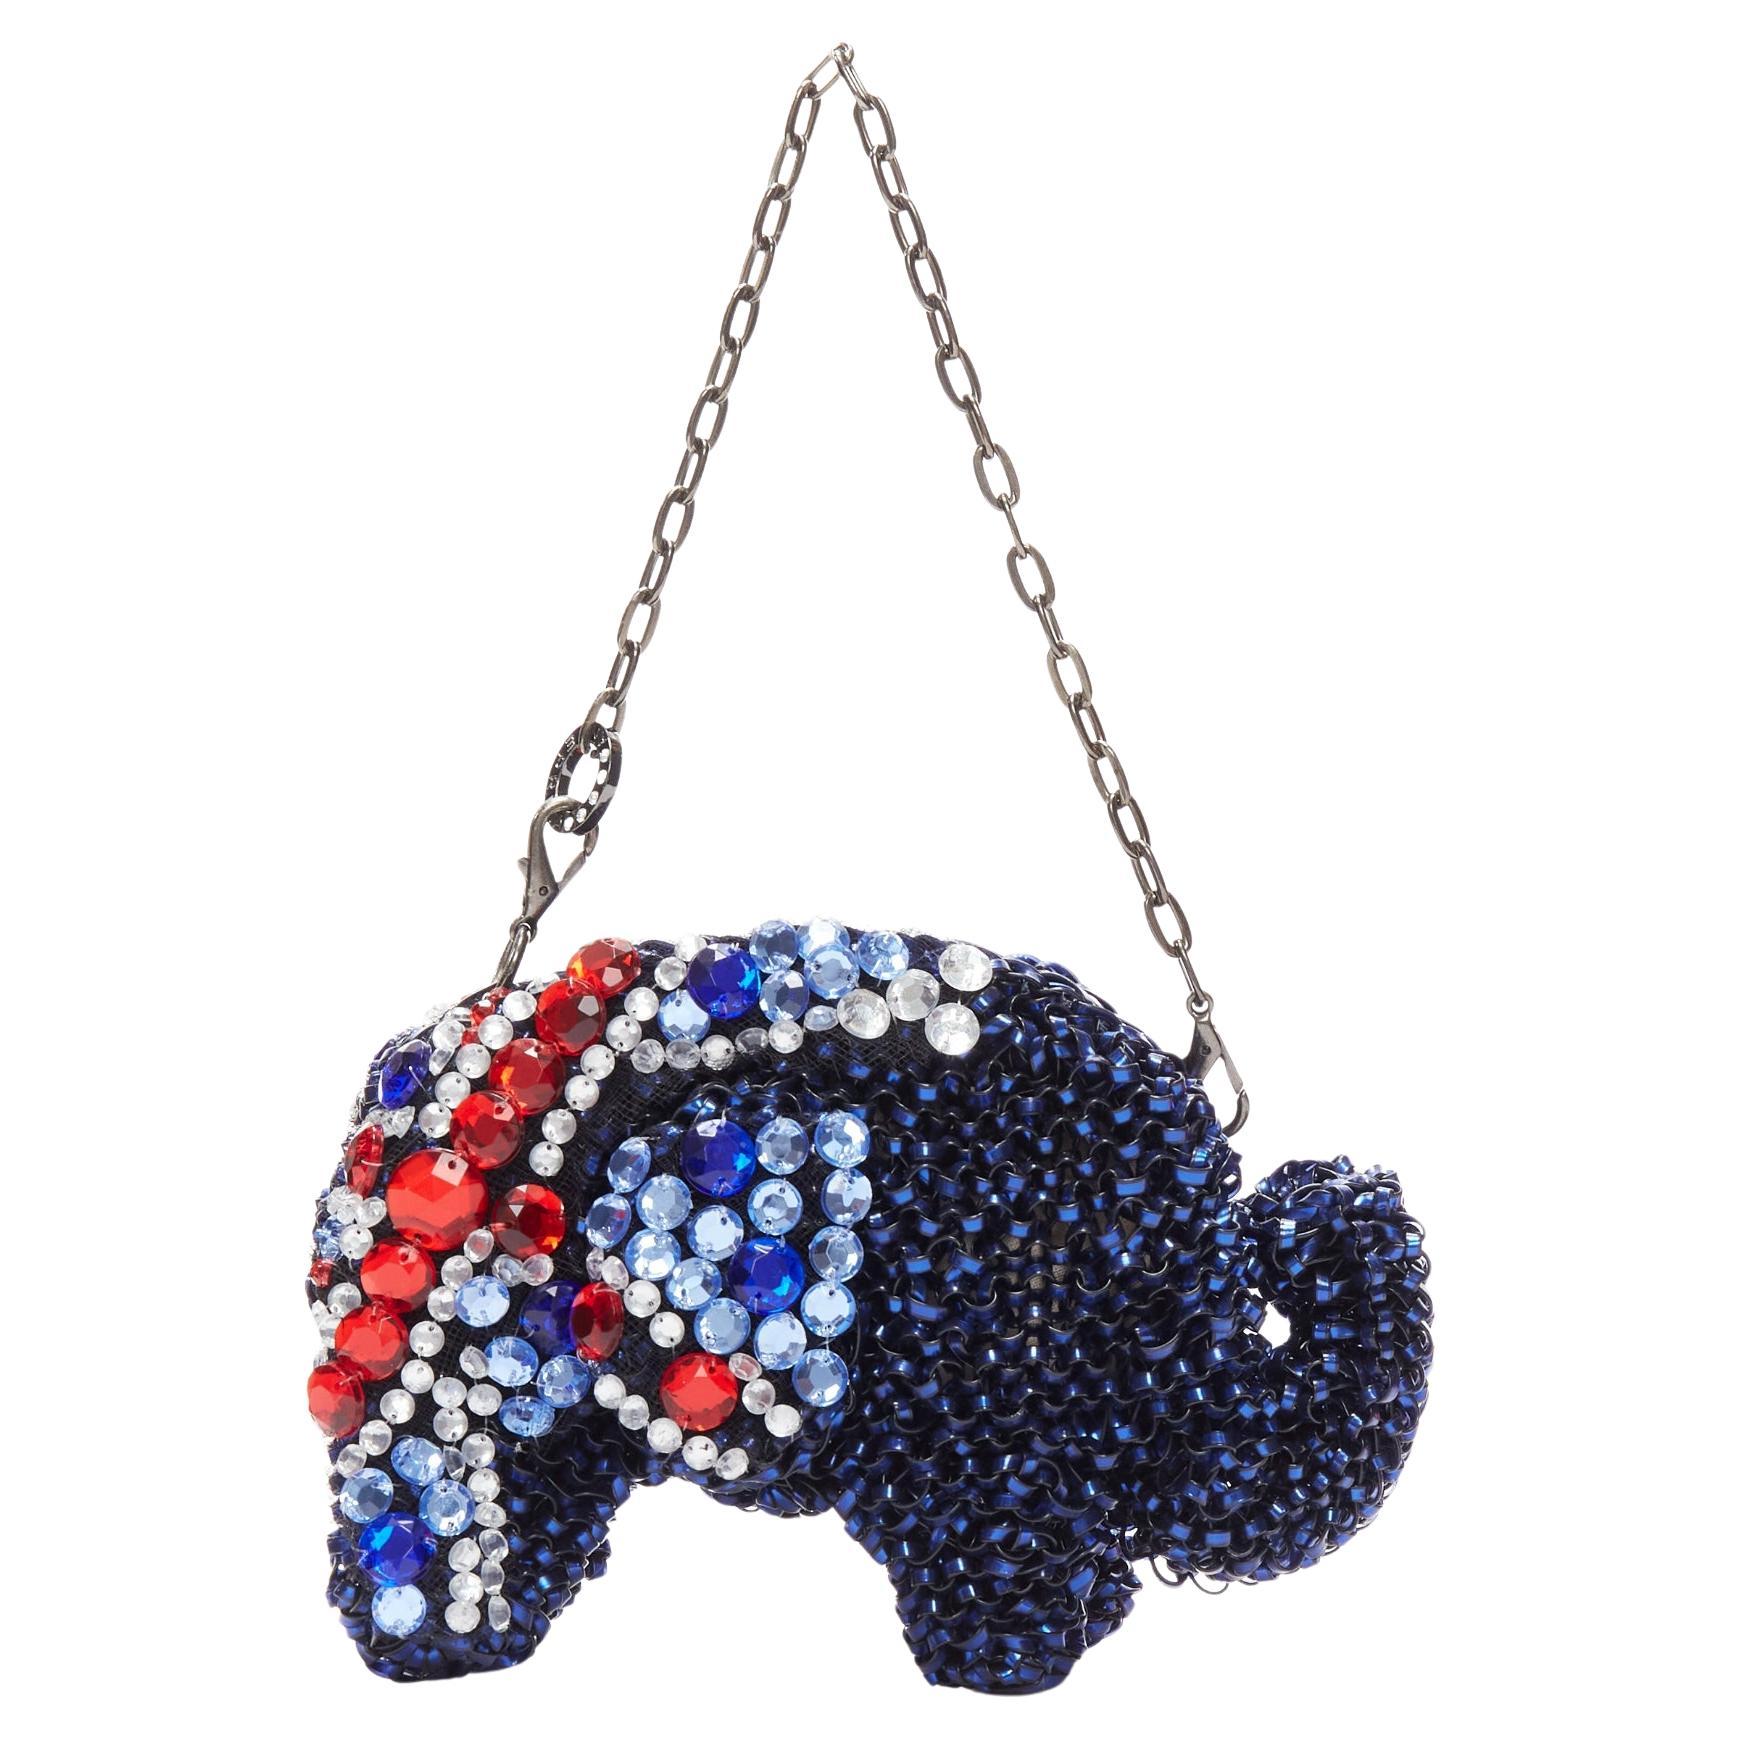 rare ANTEPRIMA Wire Bag blue red crystal Union Jack elephant clutch For Sale